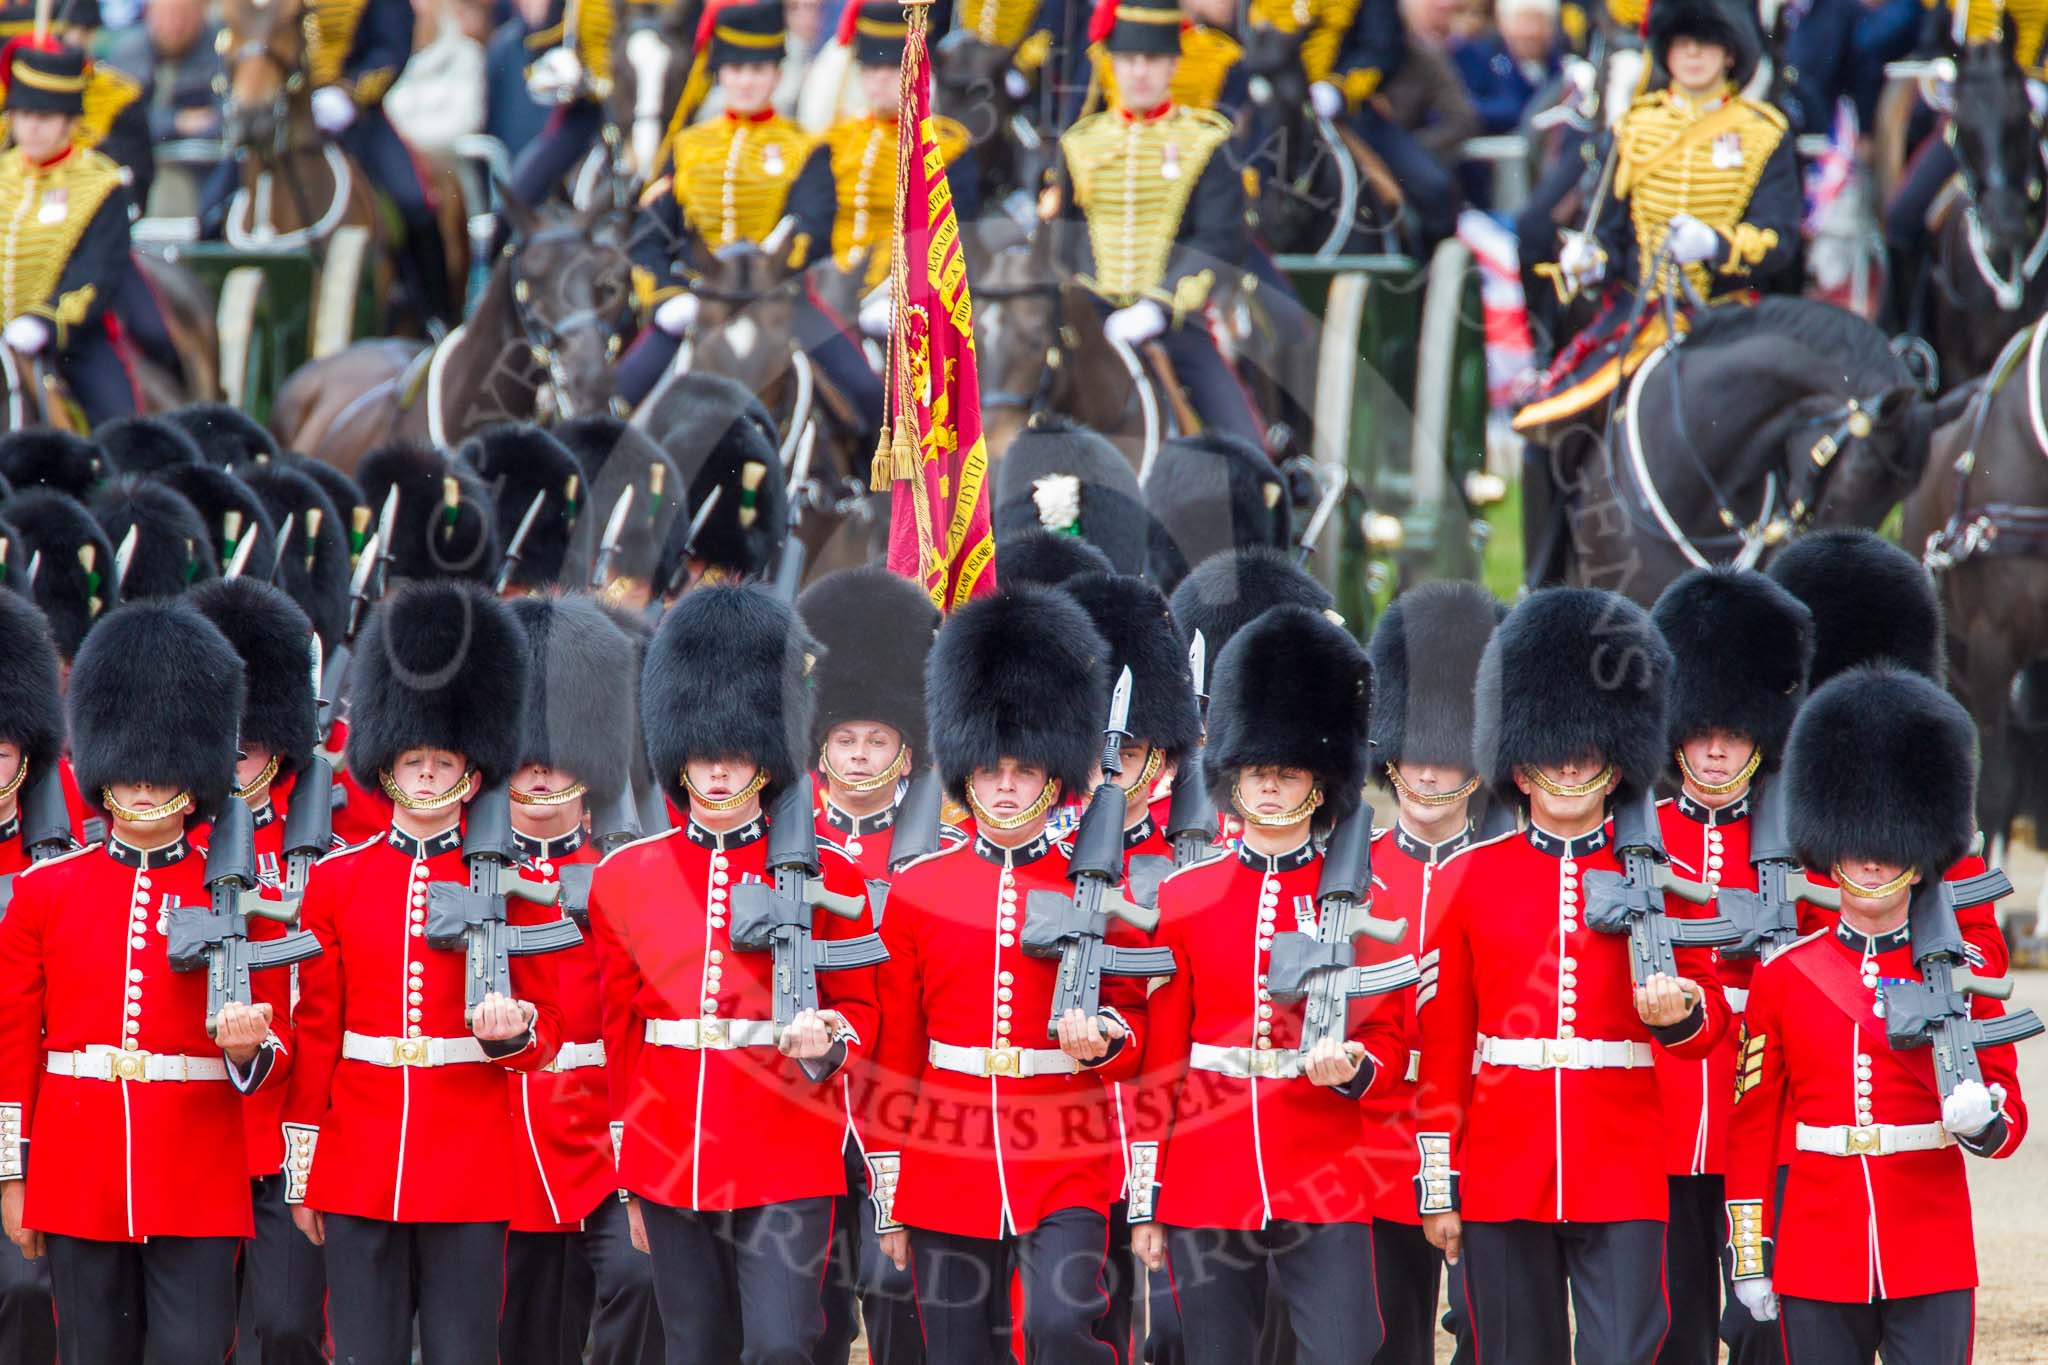 Trooping the Colour 2013: At the end of the March Past in Quick Time, all five guards on the northern side of Horse Guards Parade peform a ninety-degree-turn at the same time. Image #630, 15 June 2013 11:49 Horse Guards Parade, London, UK